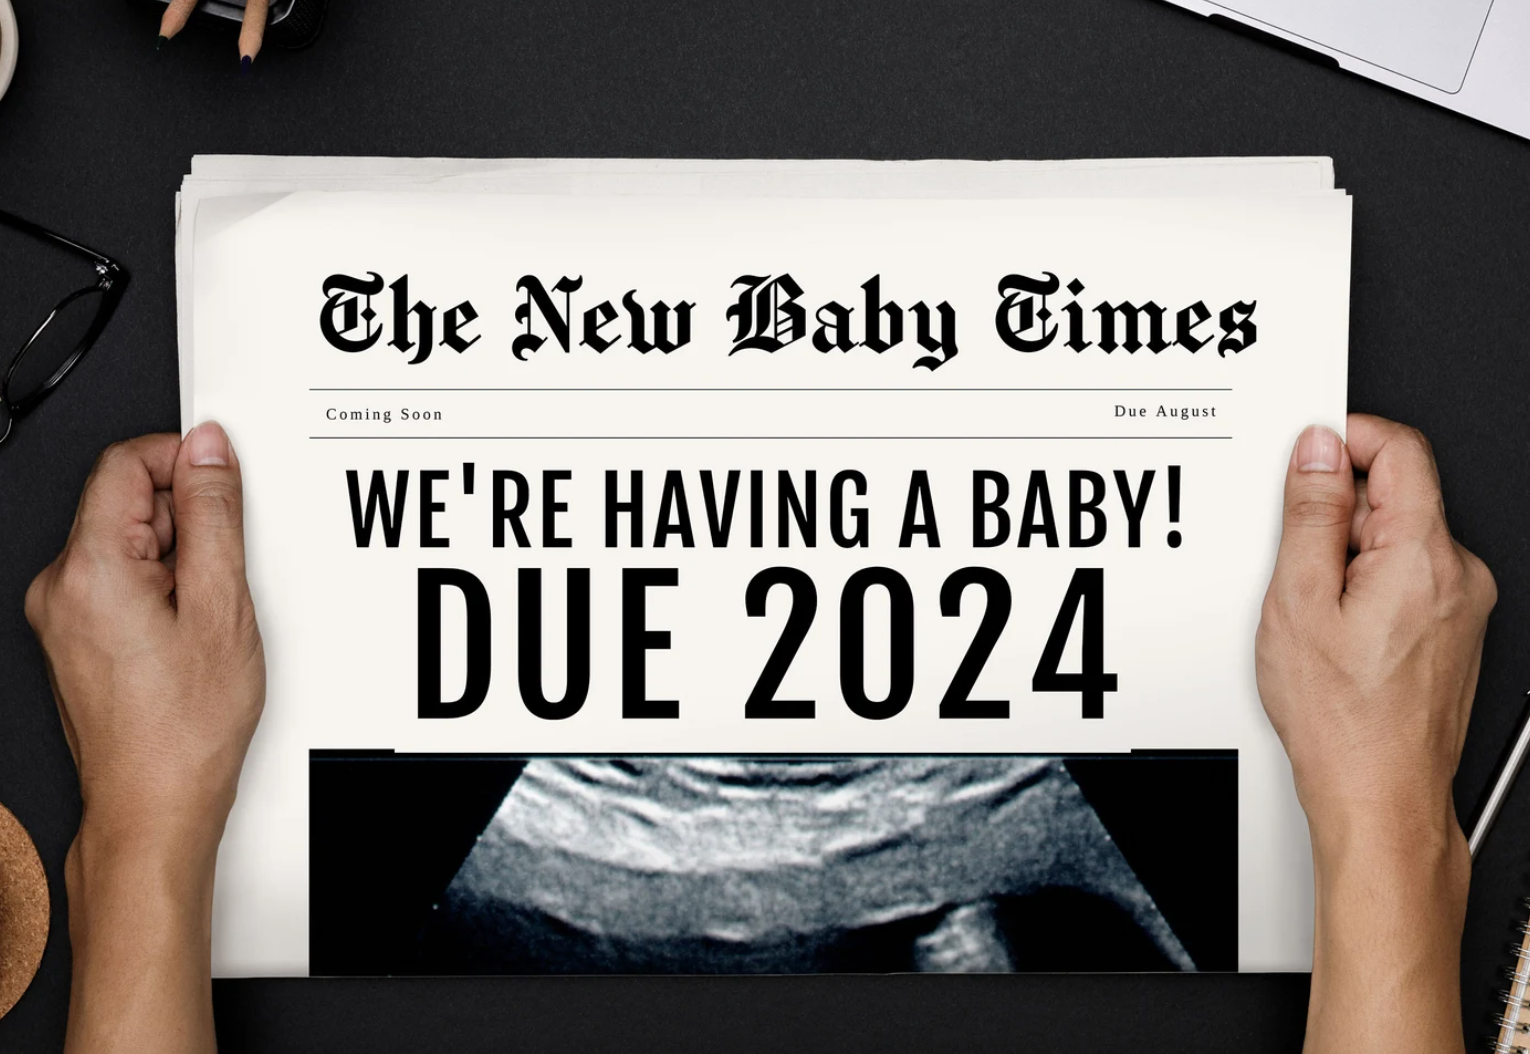 Extra! Extra! We're Having a Baby! Pregnancy Announcement Newspaper